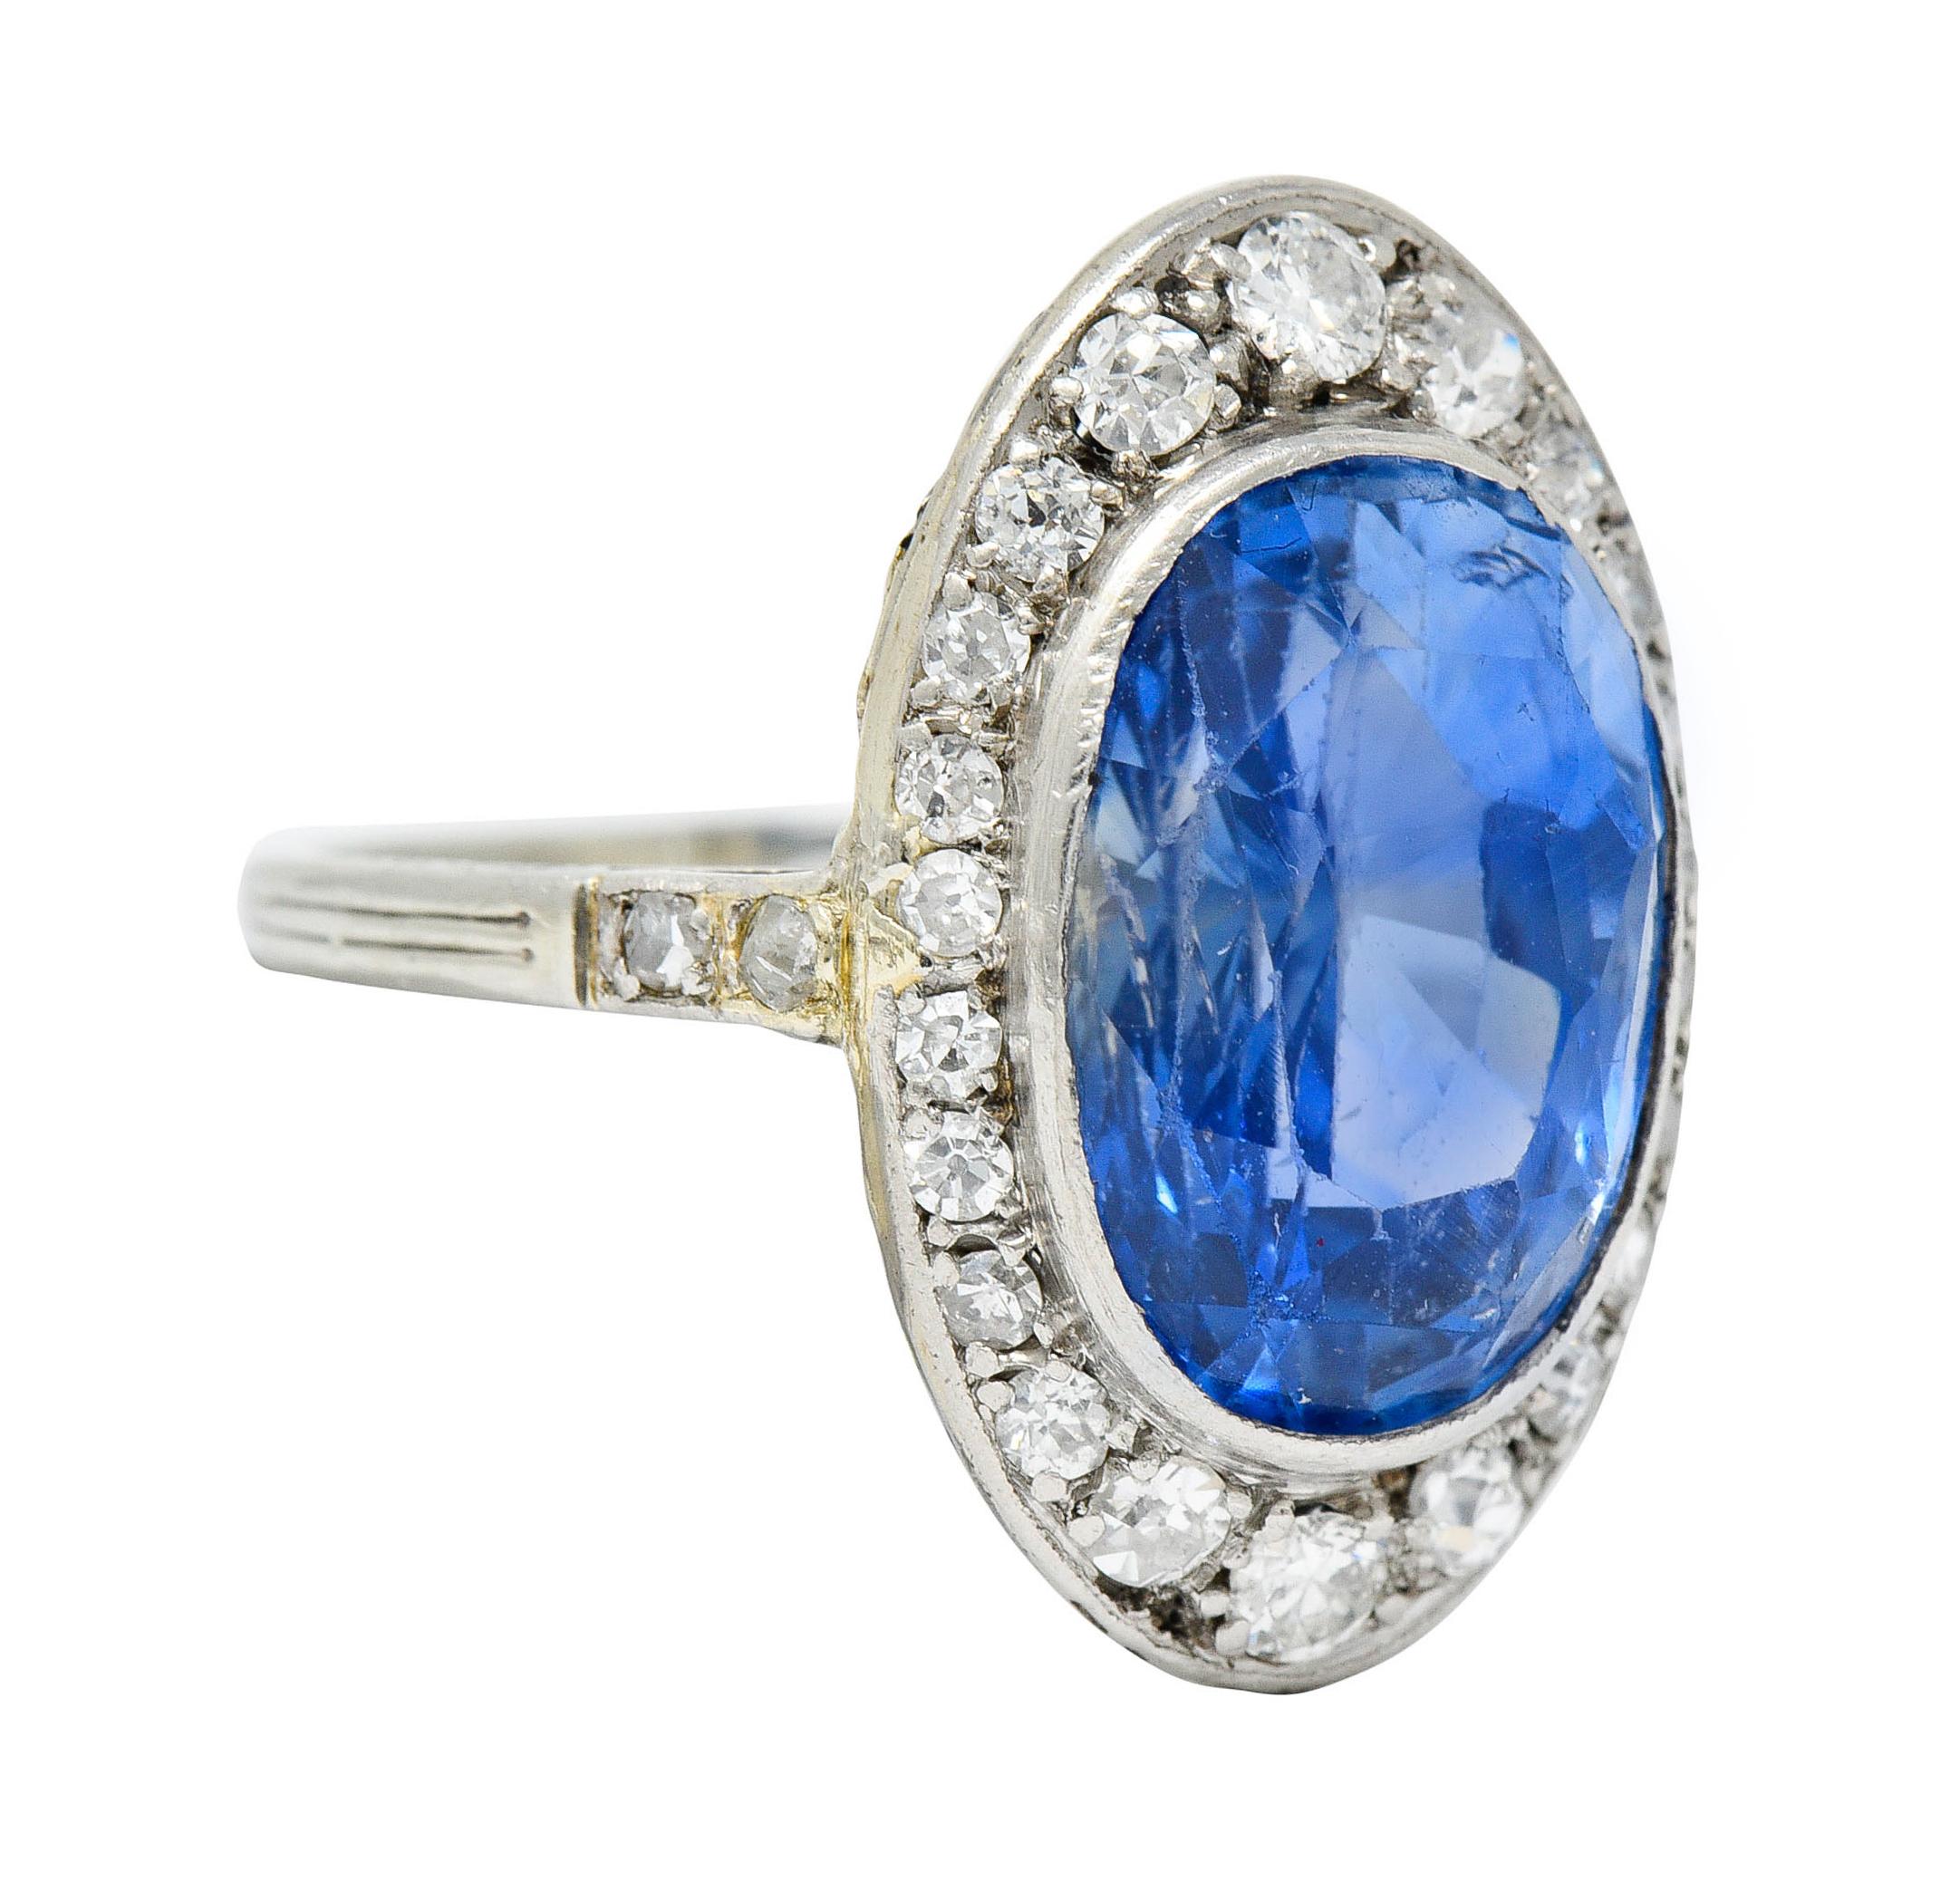 Centering a bezel set mixed oval cut Ceylon sapphire weighing approximately 7.84 carats

Transparent and medium violetish blue in color with no indications of heat - Sri Lankan in origin

Surrounded by old European, single, and round brilliant cut